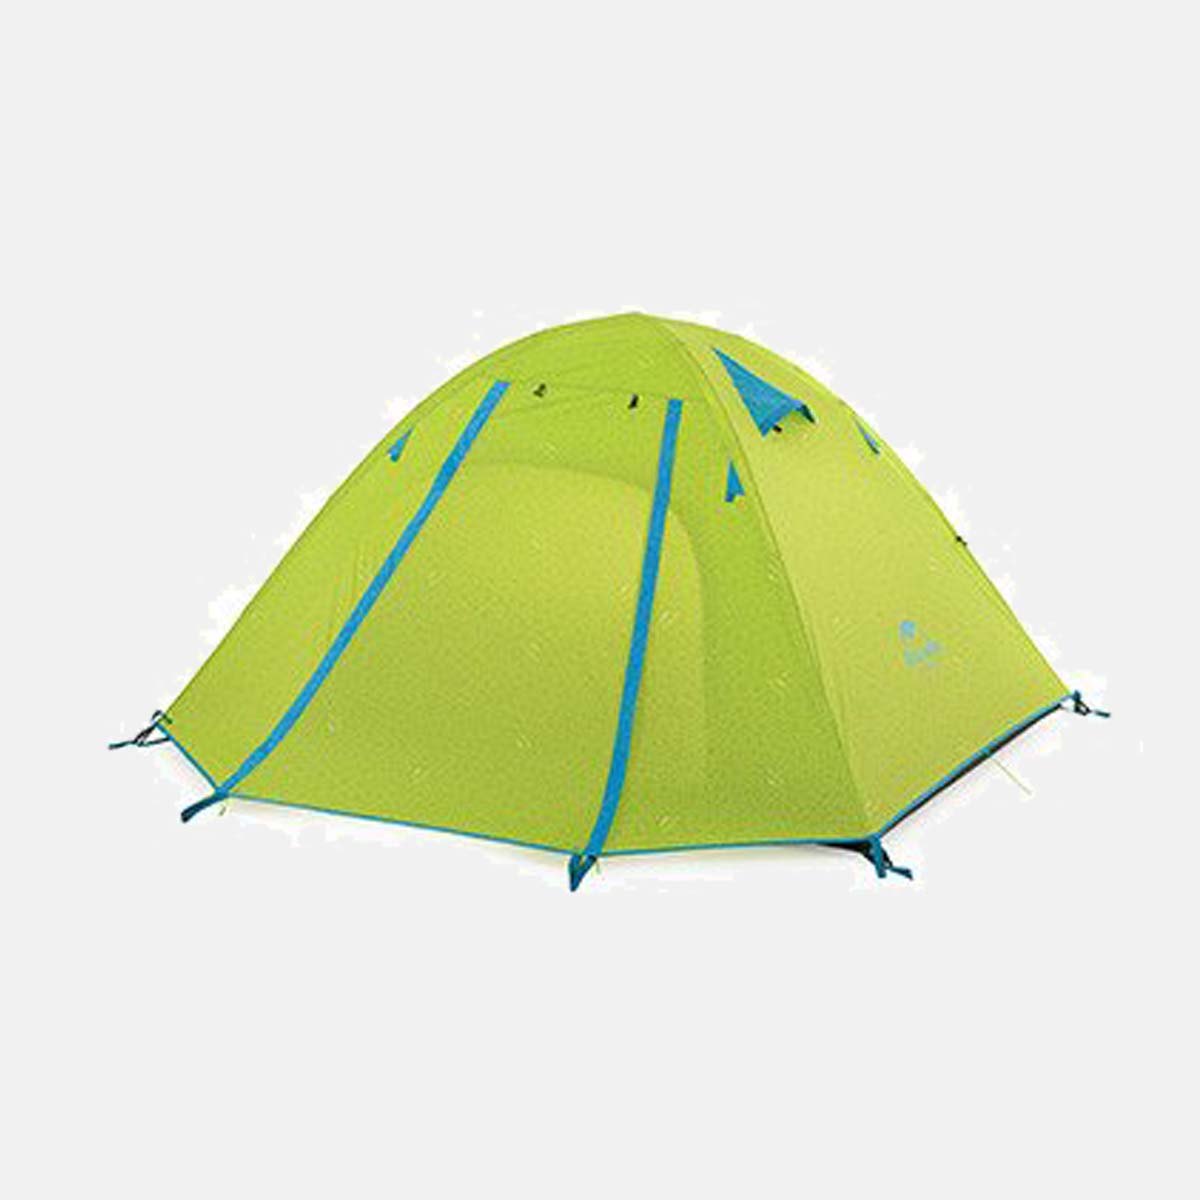 Ultralight 4 People Outdoor Tents for Camping TUPF50+ Best Waterproof Tent